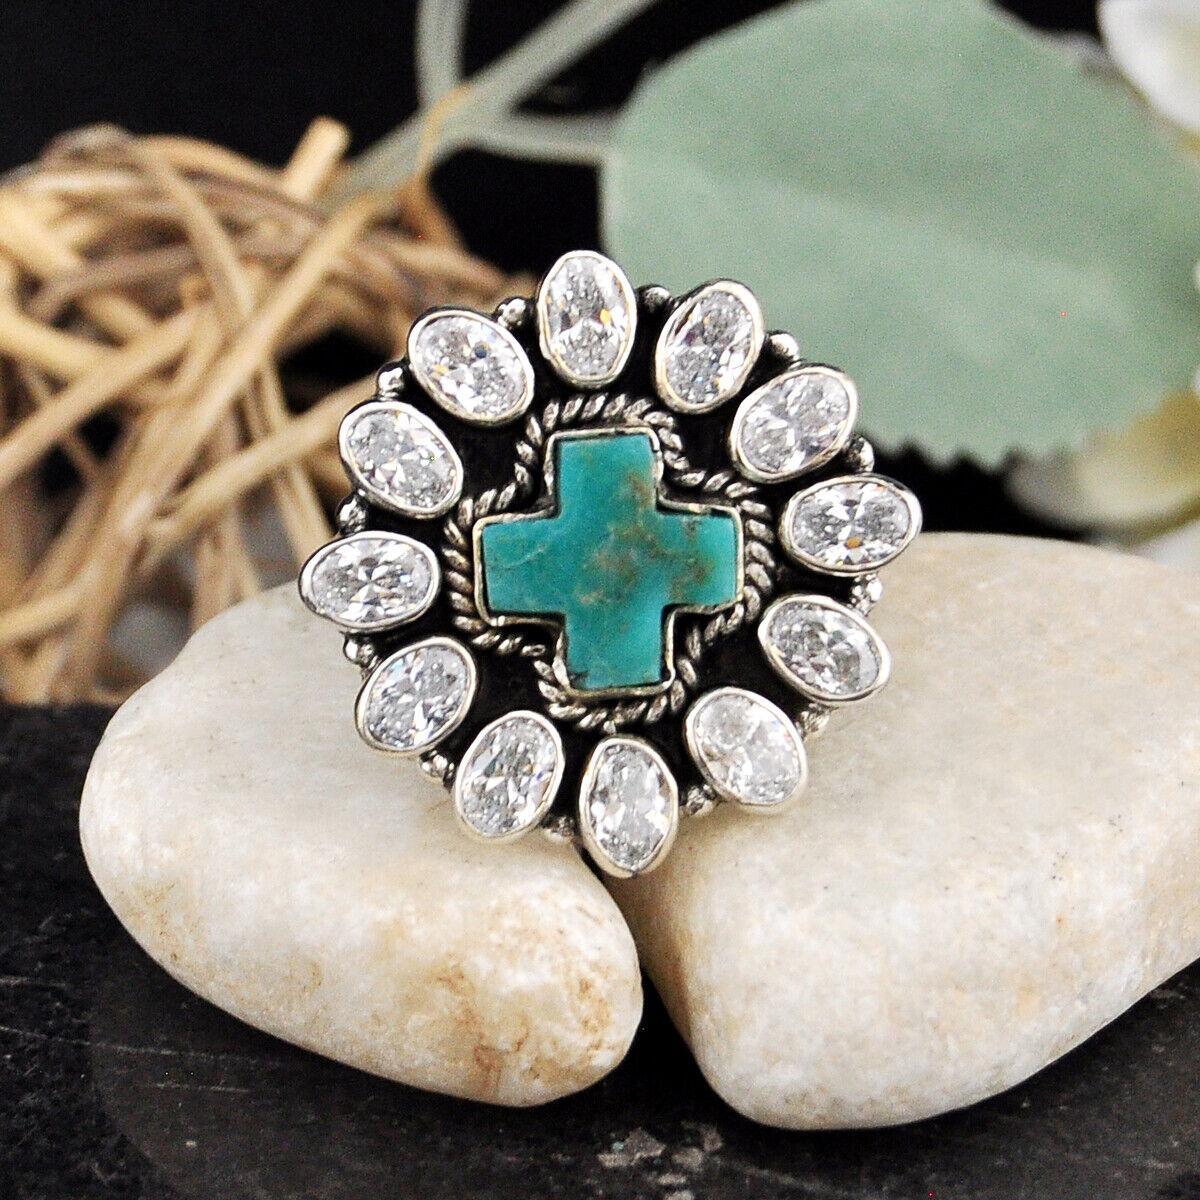 17.54cts Blue Turquoise Crystal 925 Silver Cross Ring Jewelry Size 6.5 4663